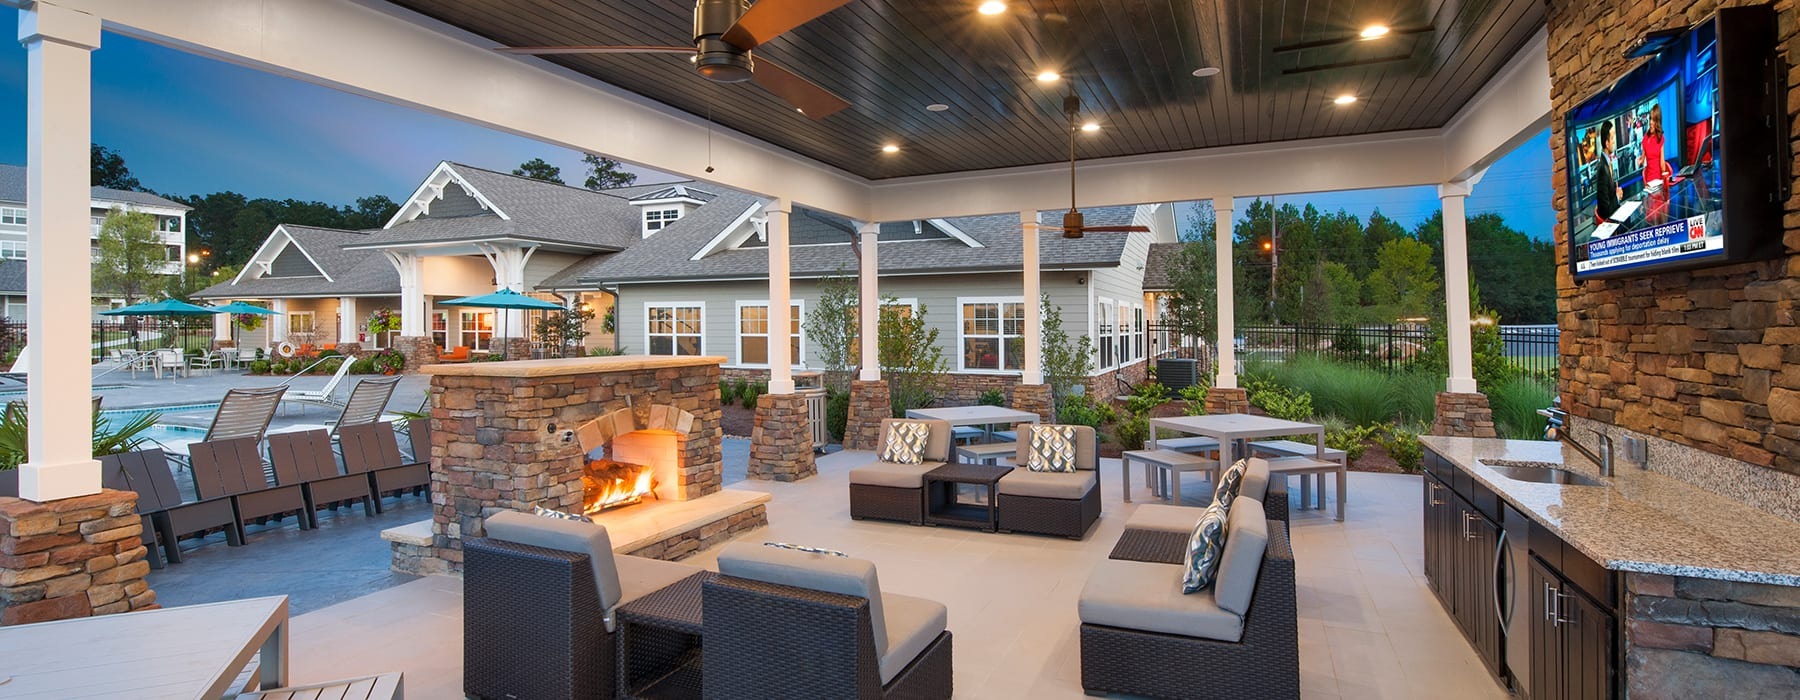 outdoor lounge area with a fireplace, ample seating and nearness to swimming pool